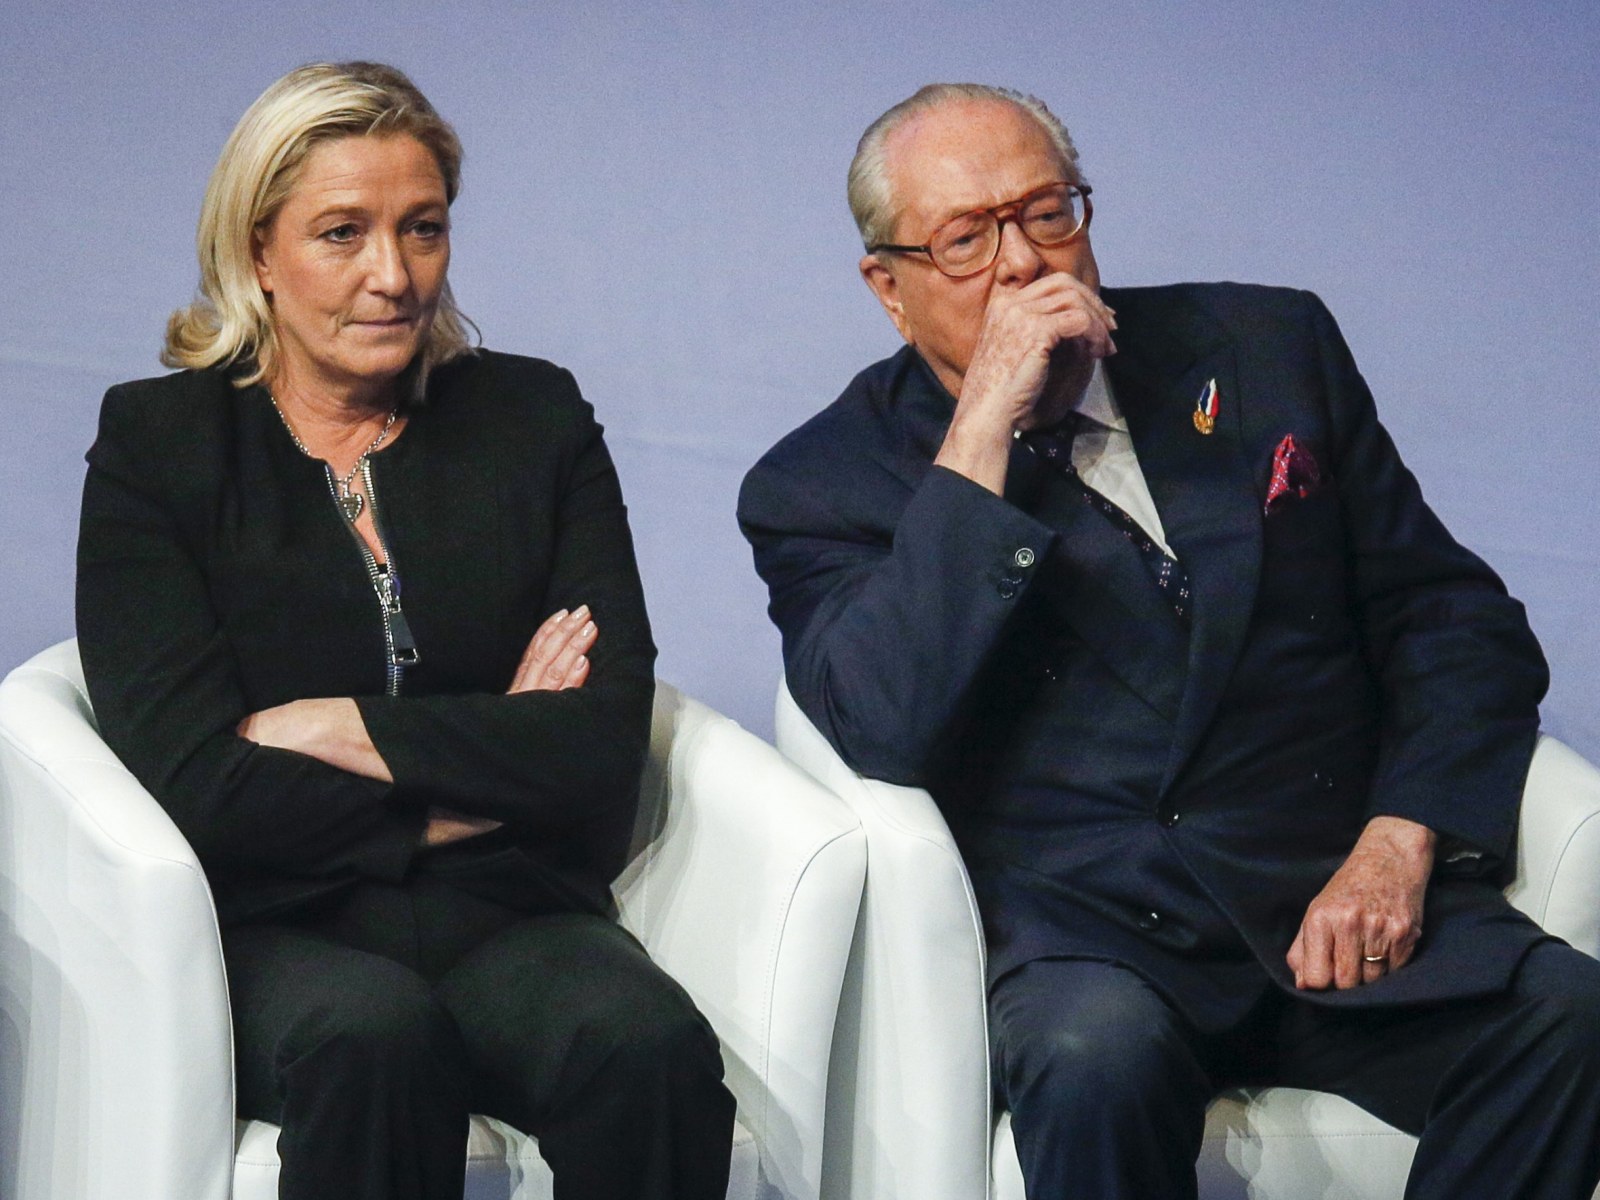 Marine Le Pen  Biography, Policies, Party, Father, & Facts